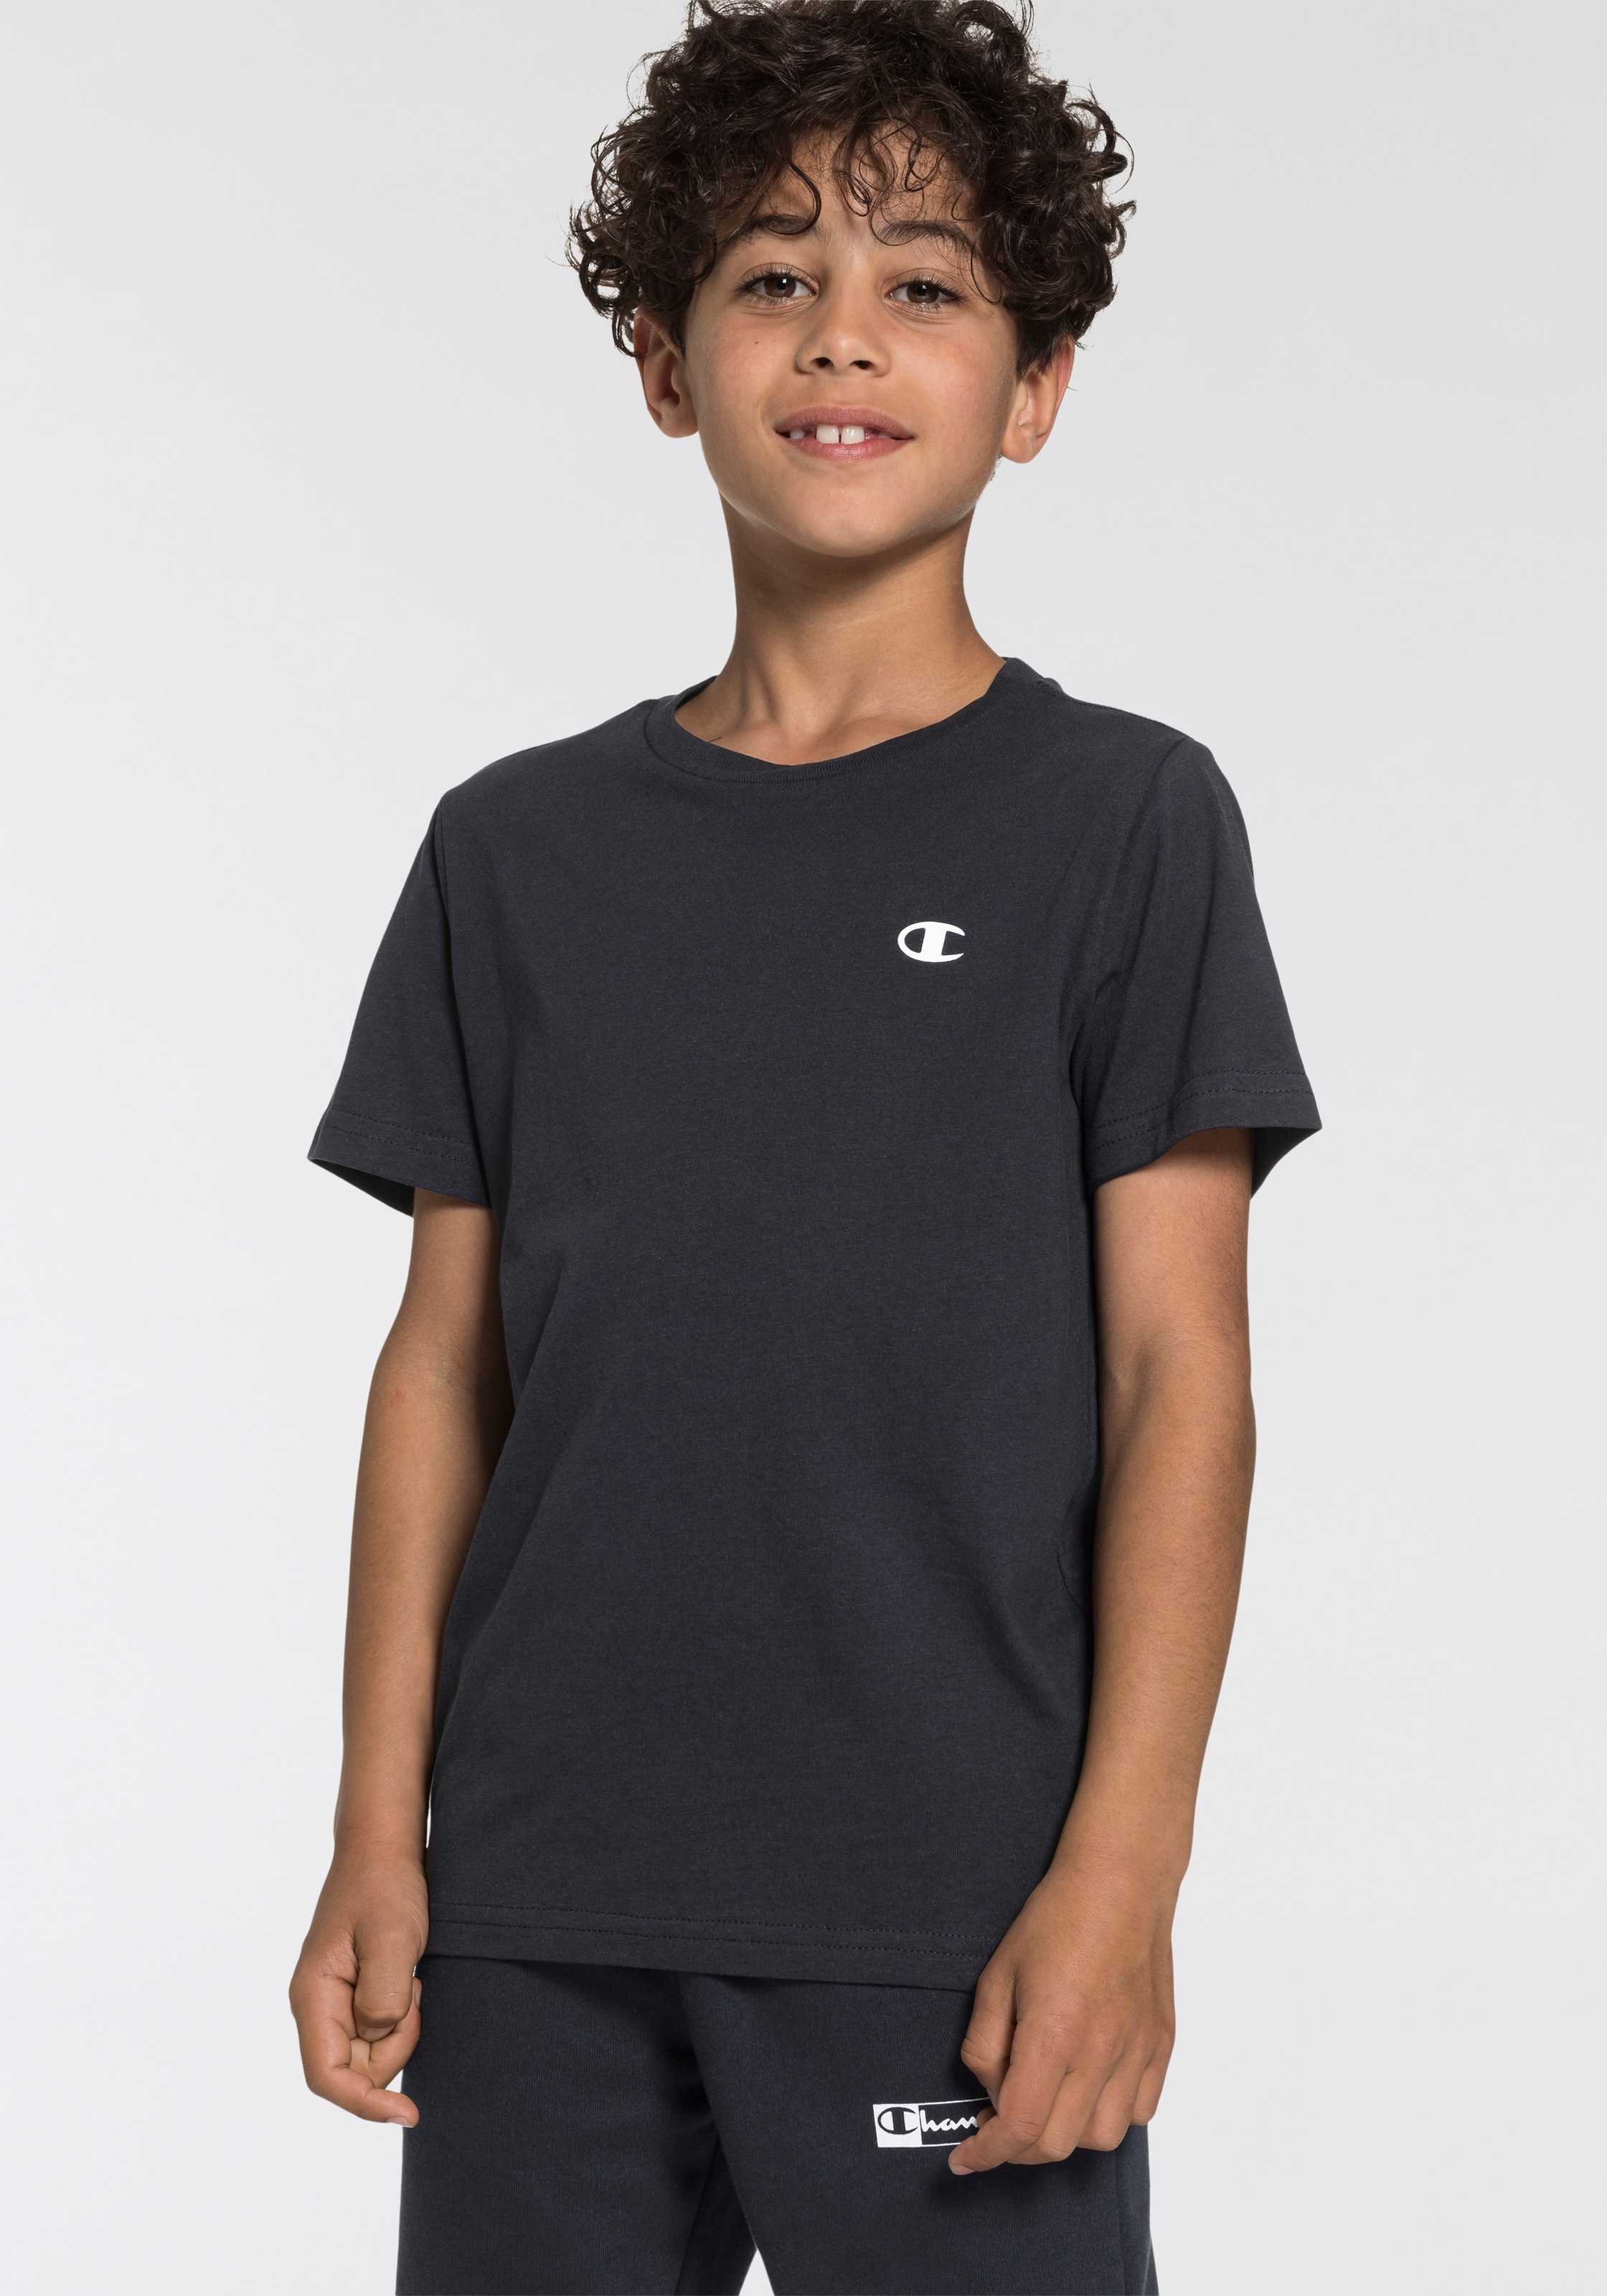 OTTO CREW »2-PCK T-Shirt tlg.) 2 NECK«, (Packung, Champion bei